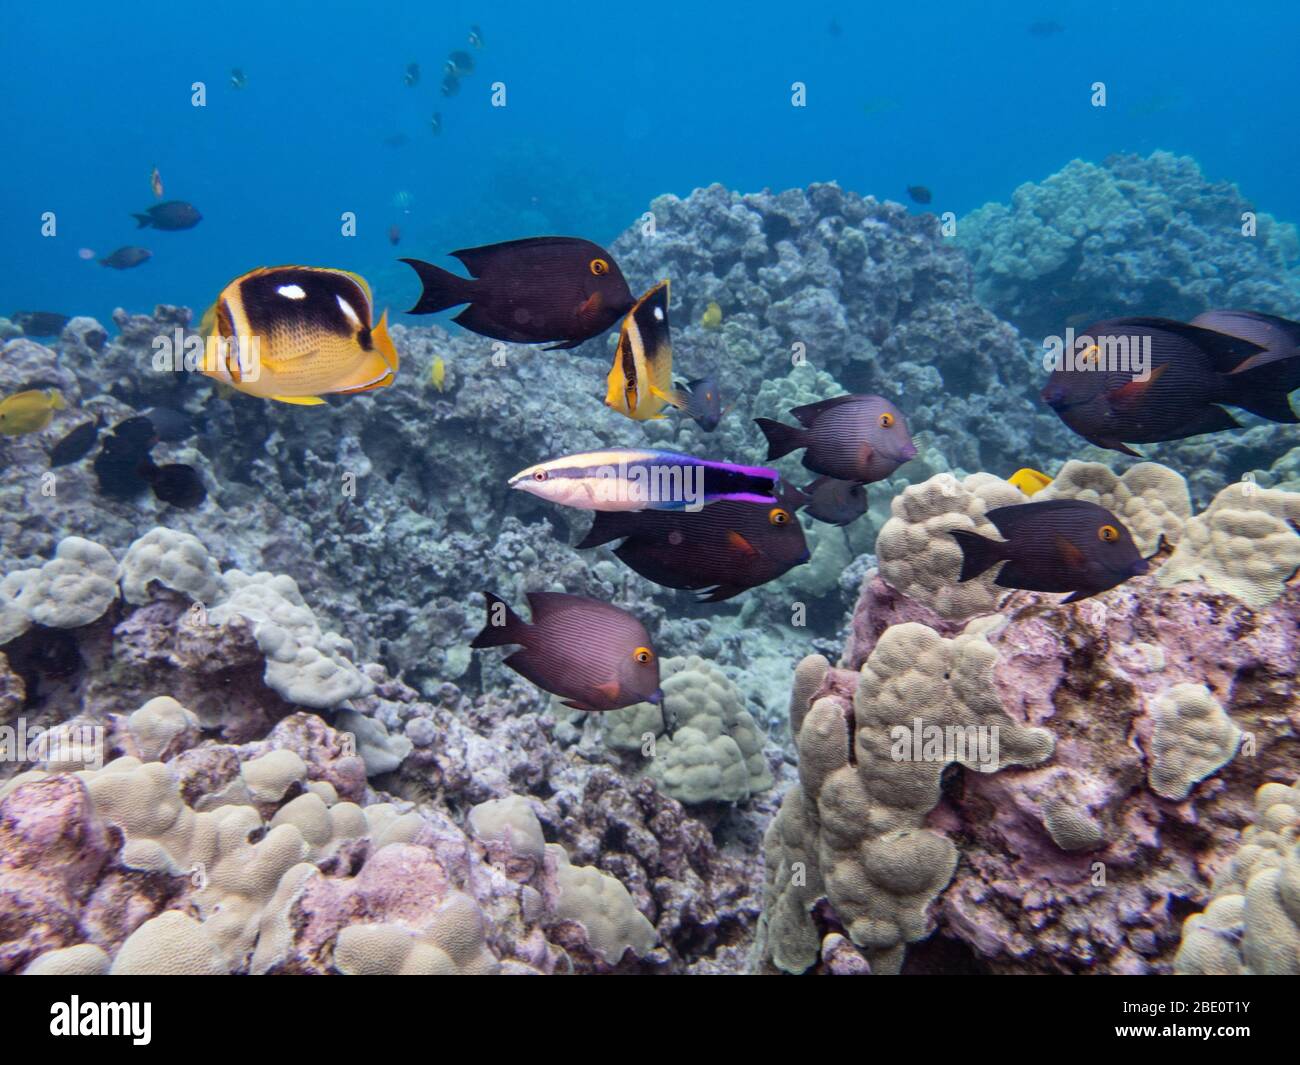 Endemic Hawaiian Cleaner Wrasse,and a school of mixed reef fish waiting to be cleaned. Stock Photo